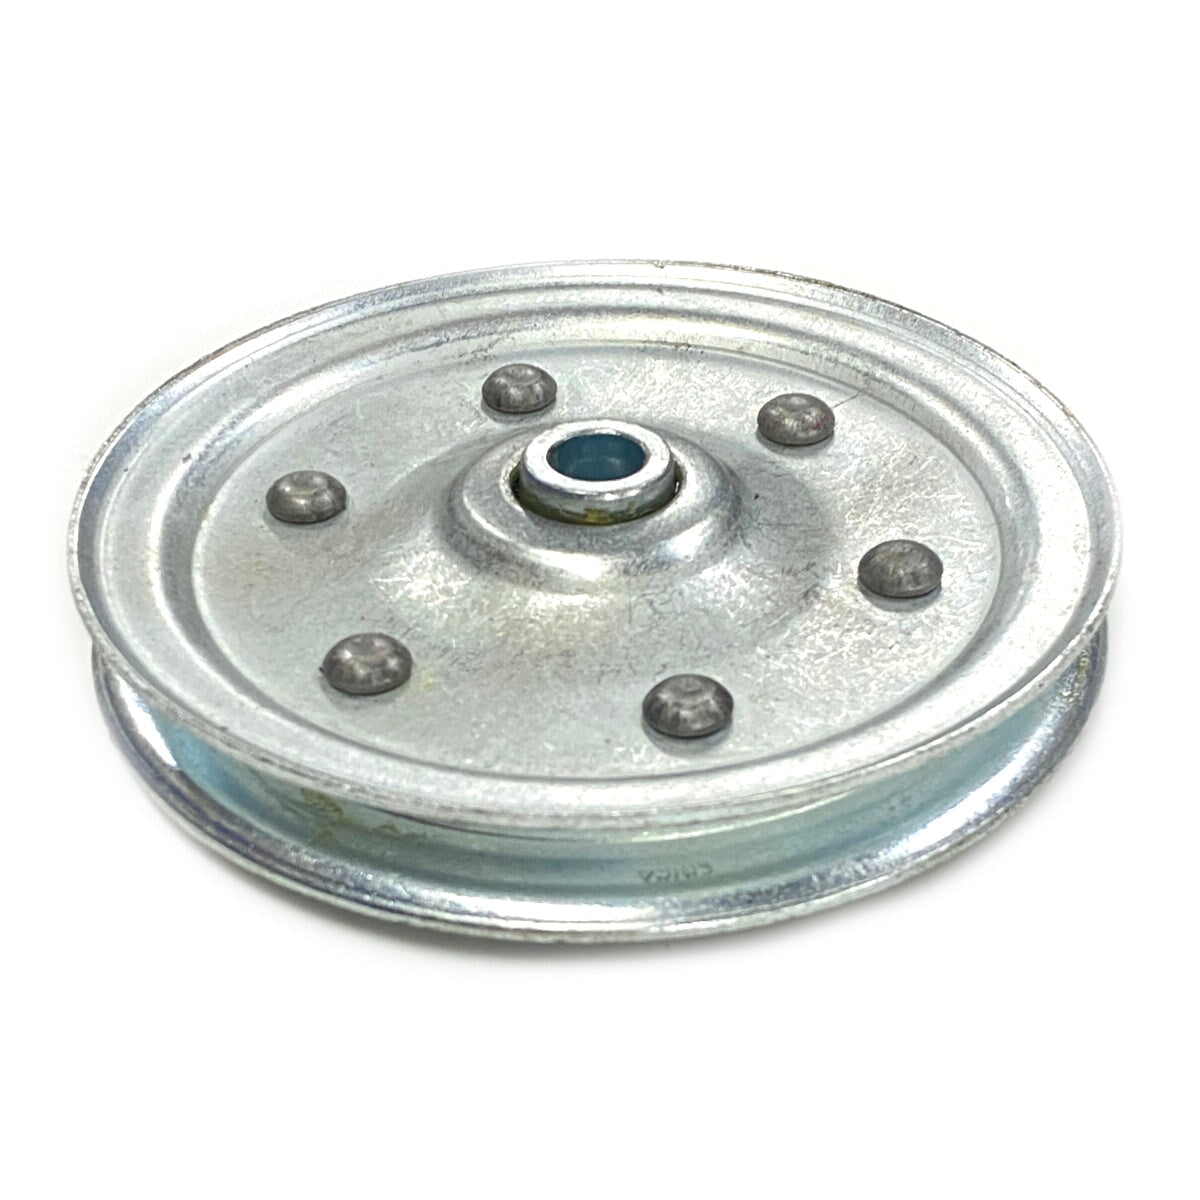 4" diameter extension spring pulley